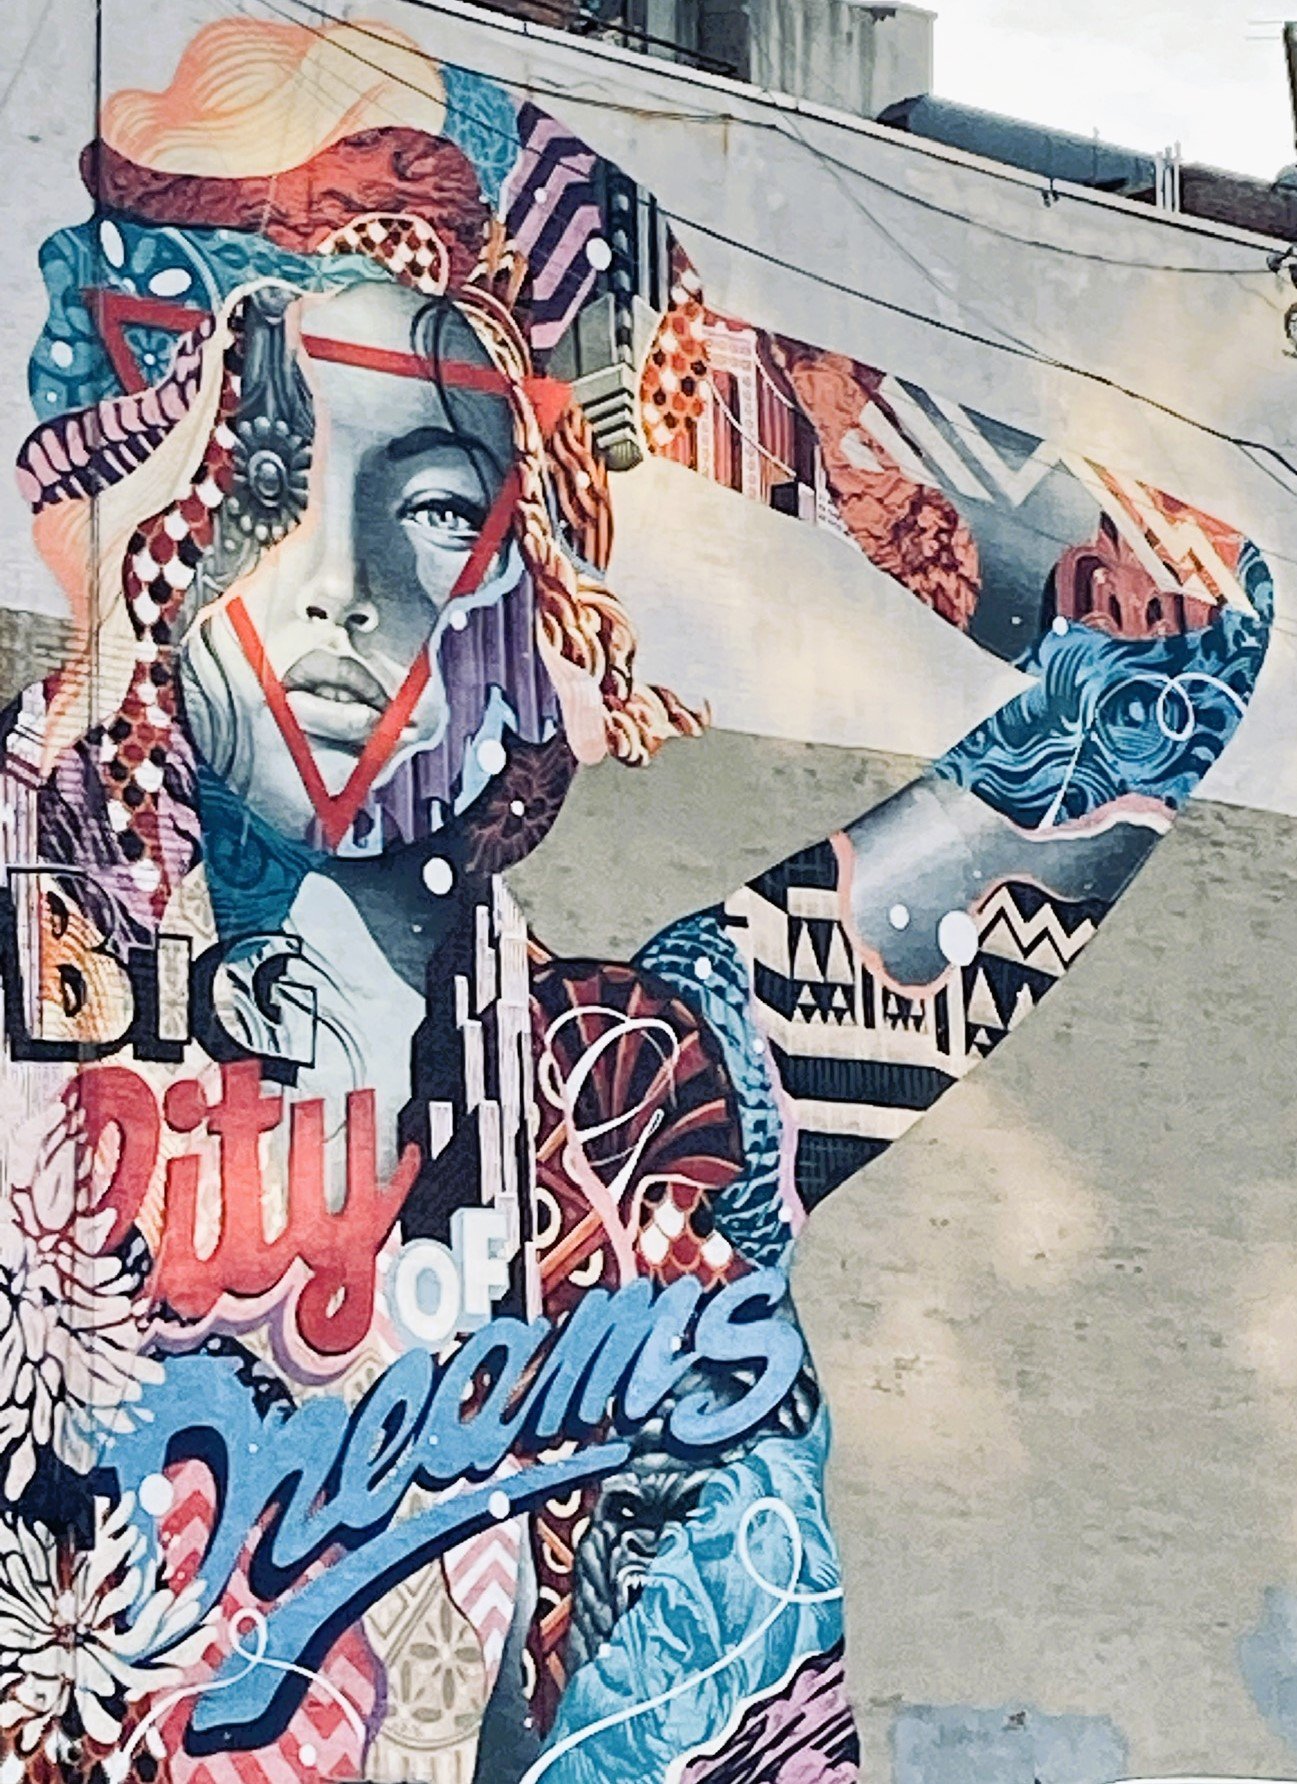 Colorful mural of a woman with "City of Dreams" text